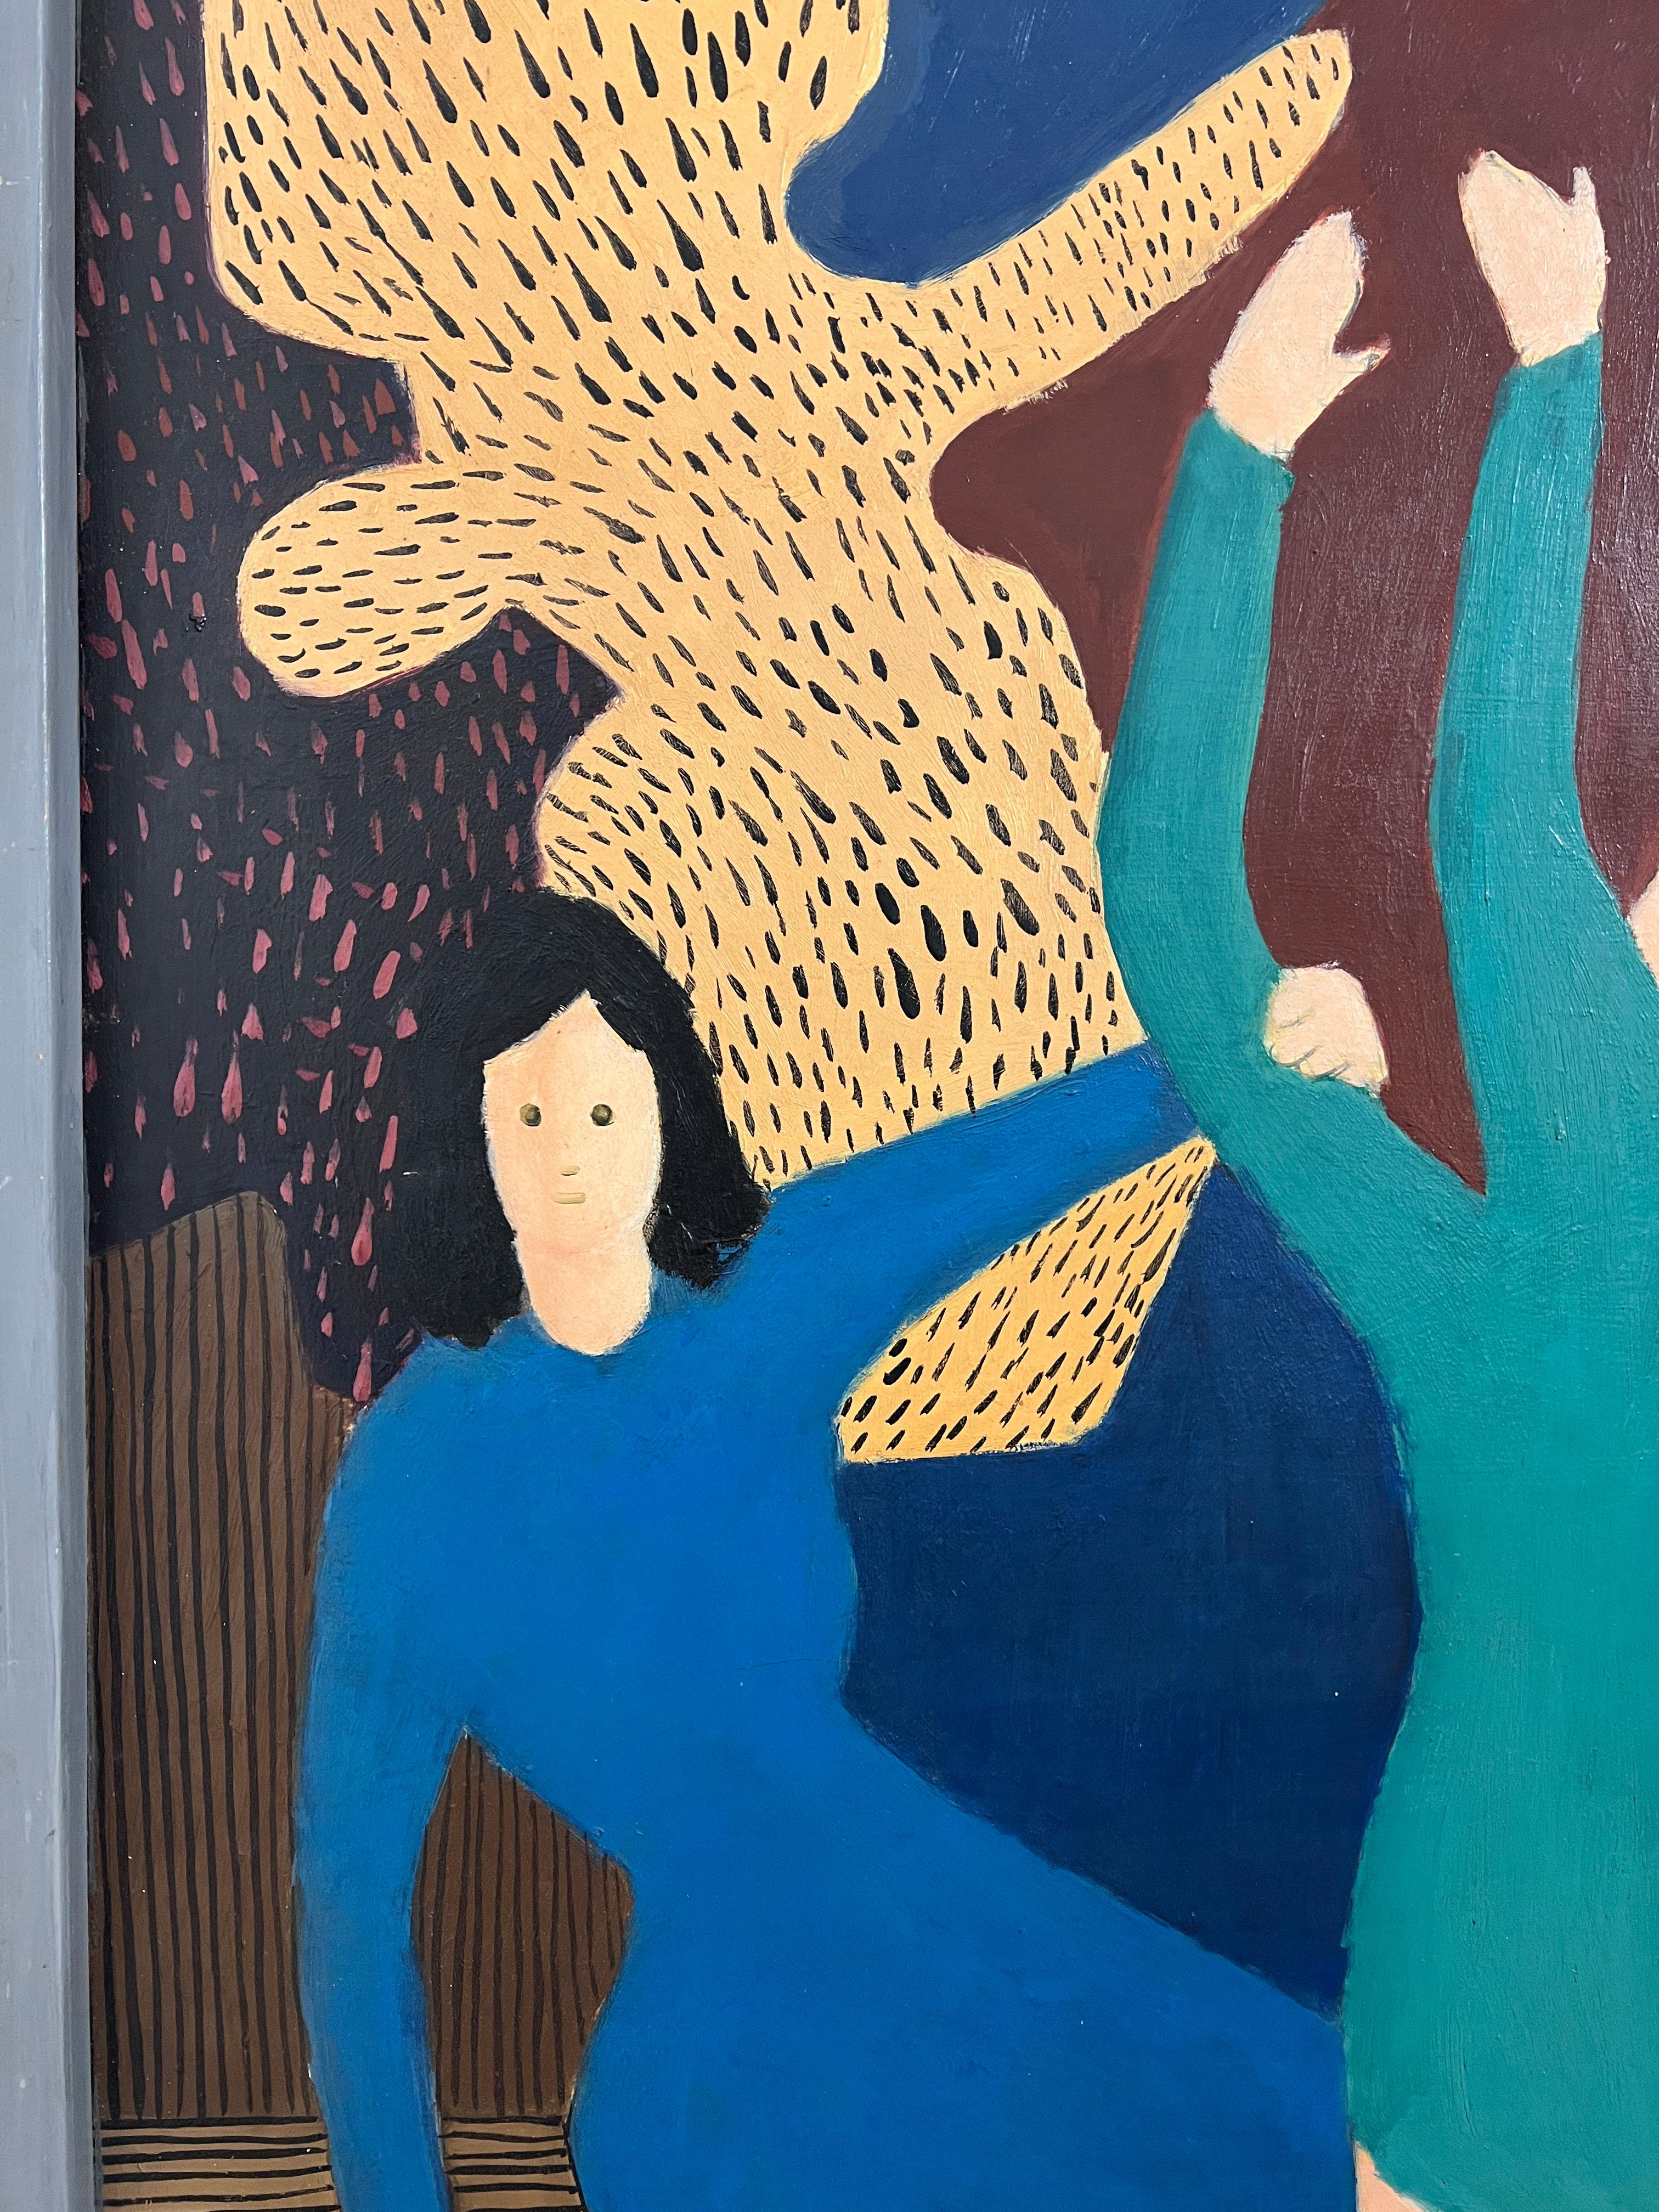 We recently acquired a number of paintings from the estate of the noted outsider artist Peter Paul Sakowski (1915-2000) of Holyoke, Mass. His style tended to vary from an illustrative graphic quality to the more fractured cubism he adopted during